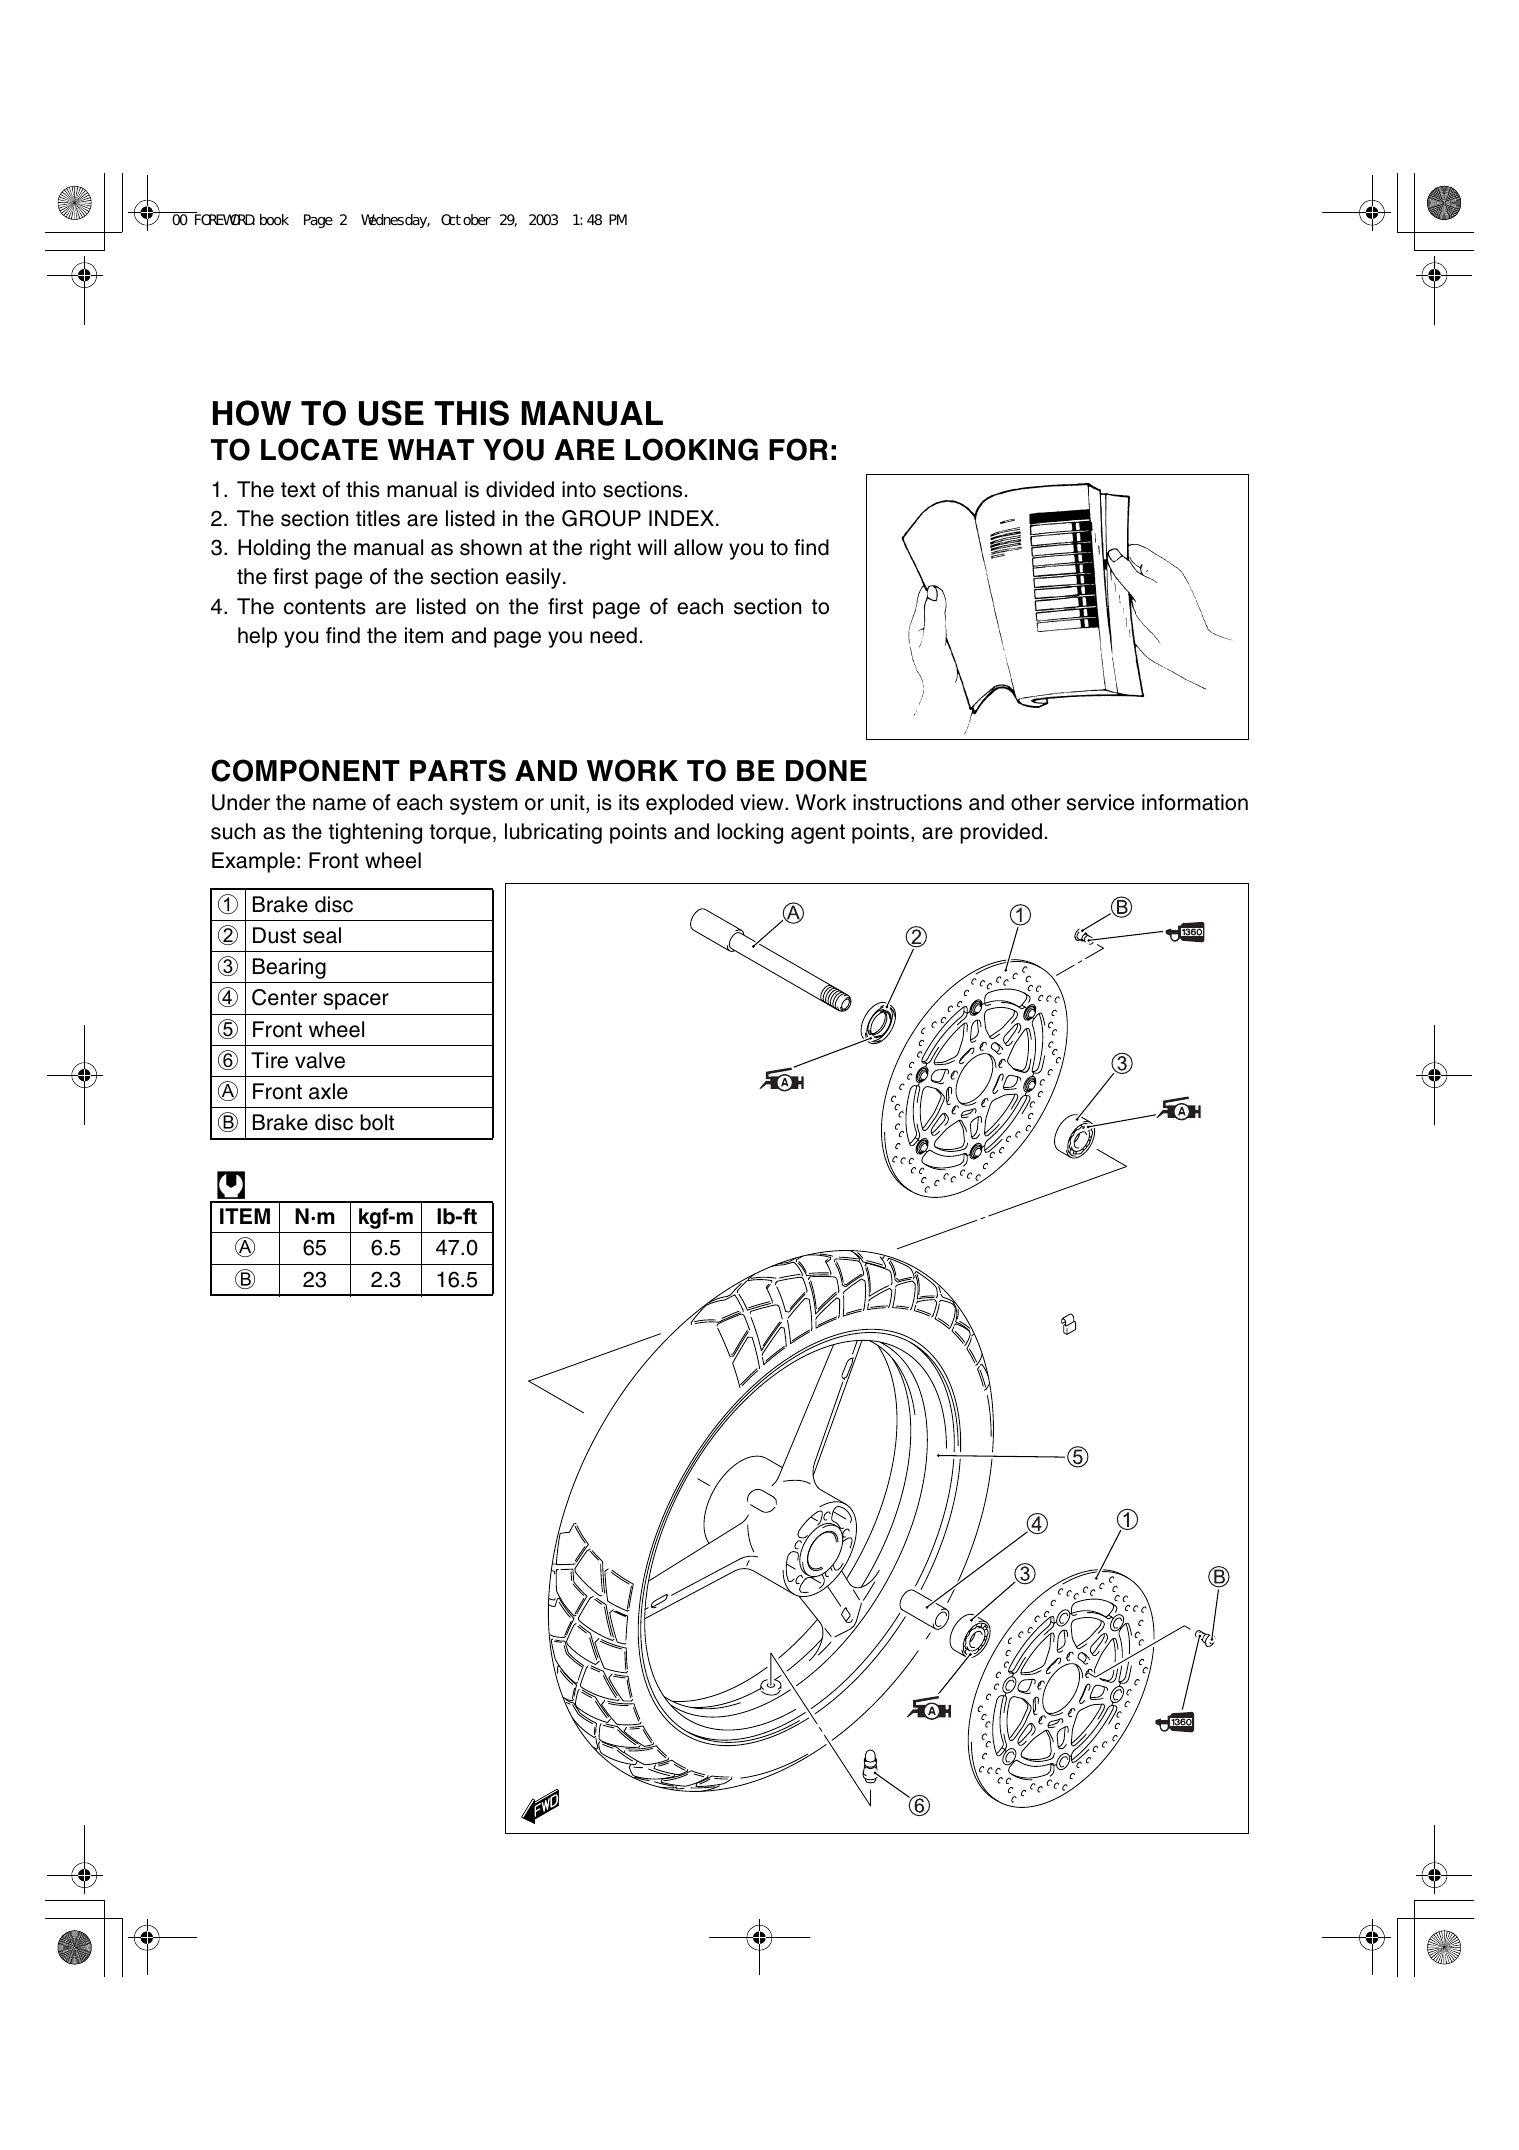 2004-2008 Suzuki DL650 V-Strom repair, service and shop manual Preview image 3